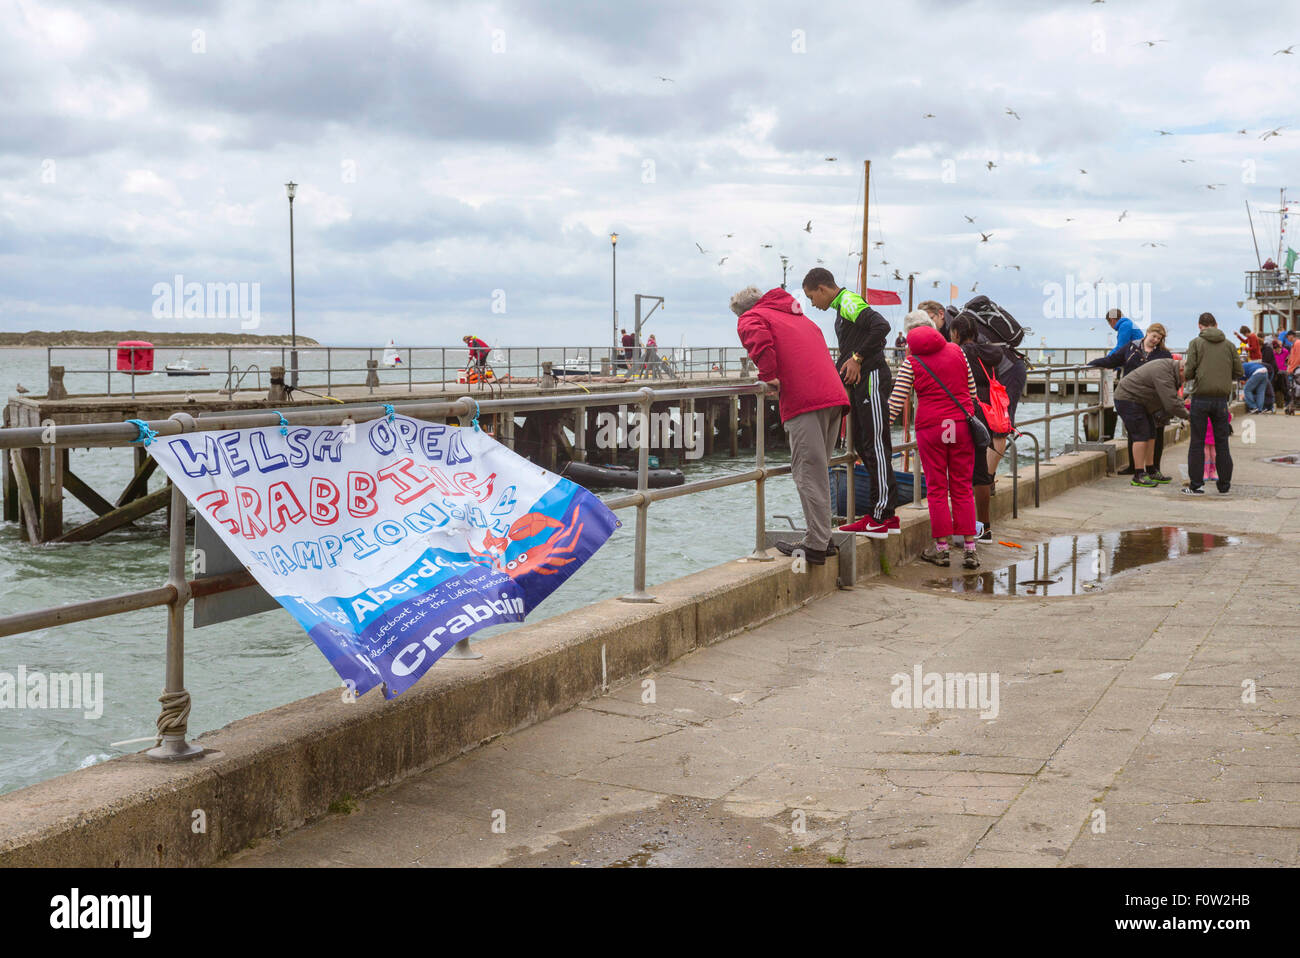 Families gather at the quayside to watch or participate in the Welsh open crabbing championship in Aberdyfi Wales. Stock Photo